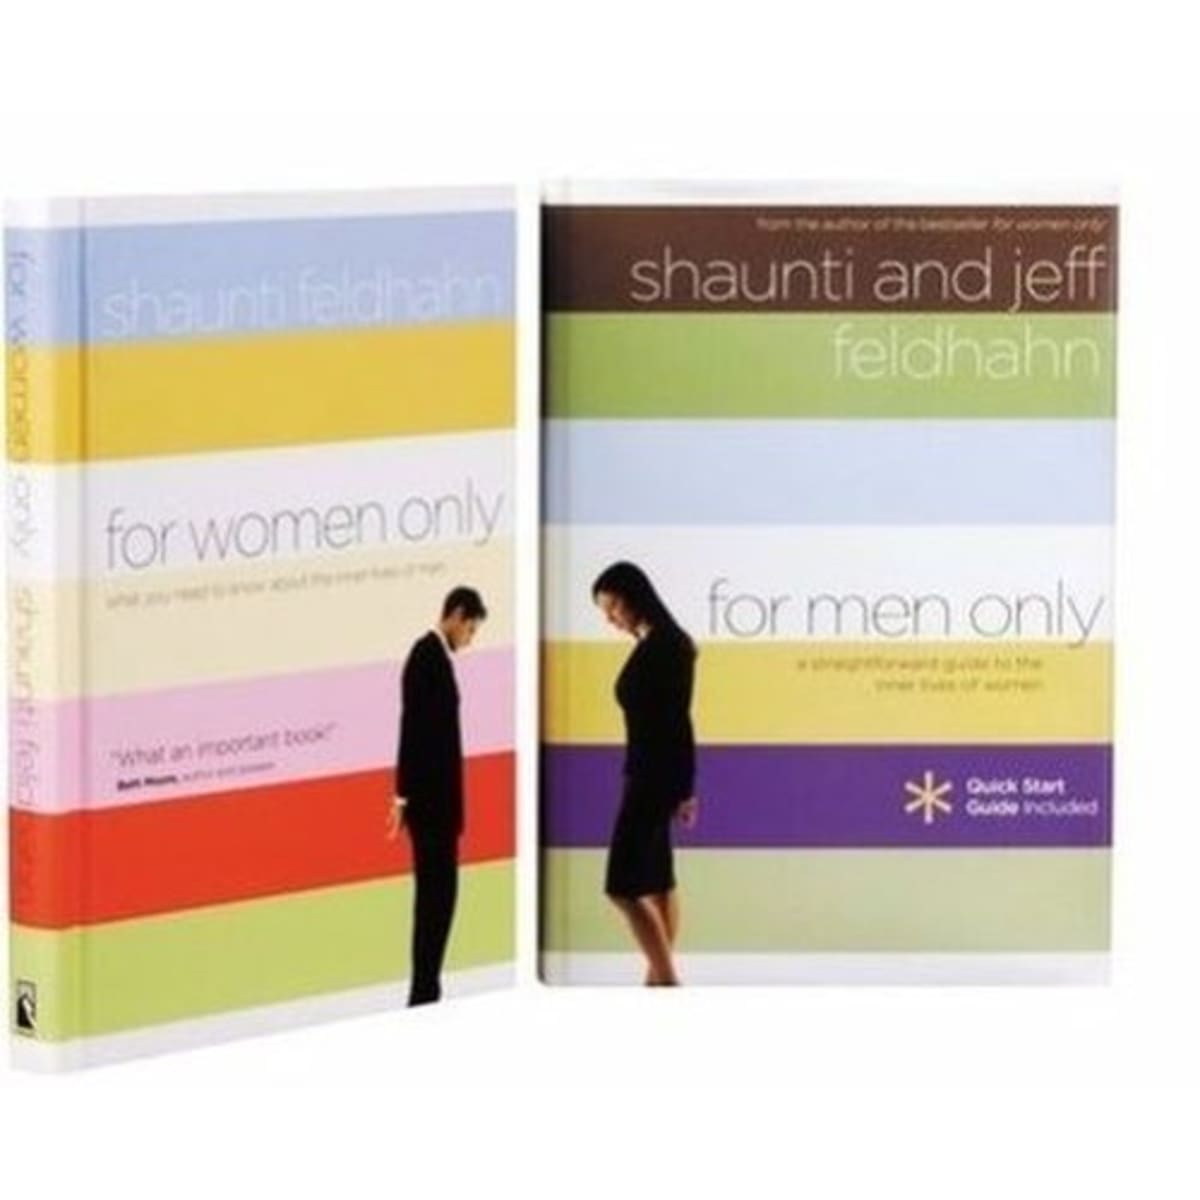 For Men Only + For Women Only - Shaunti And Jeff Feldhahn